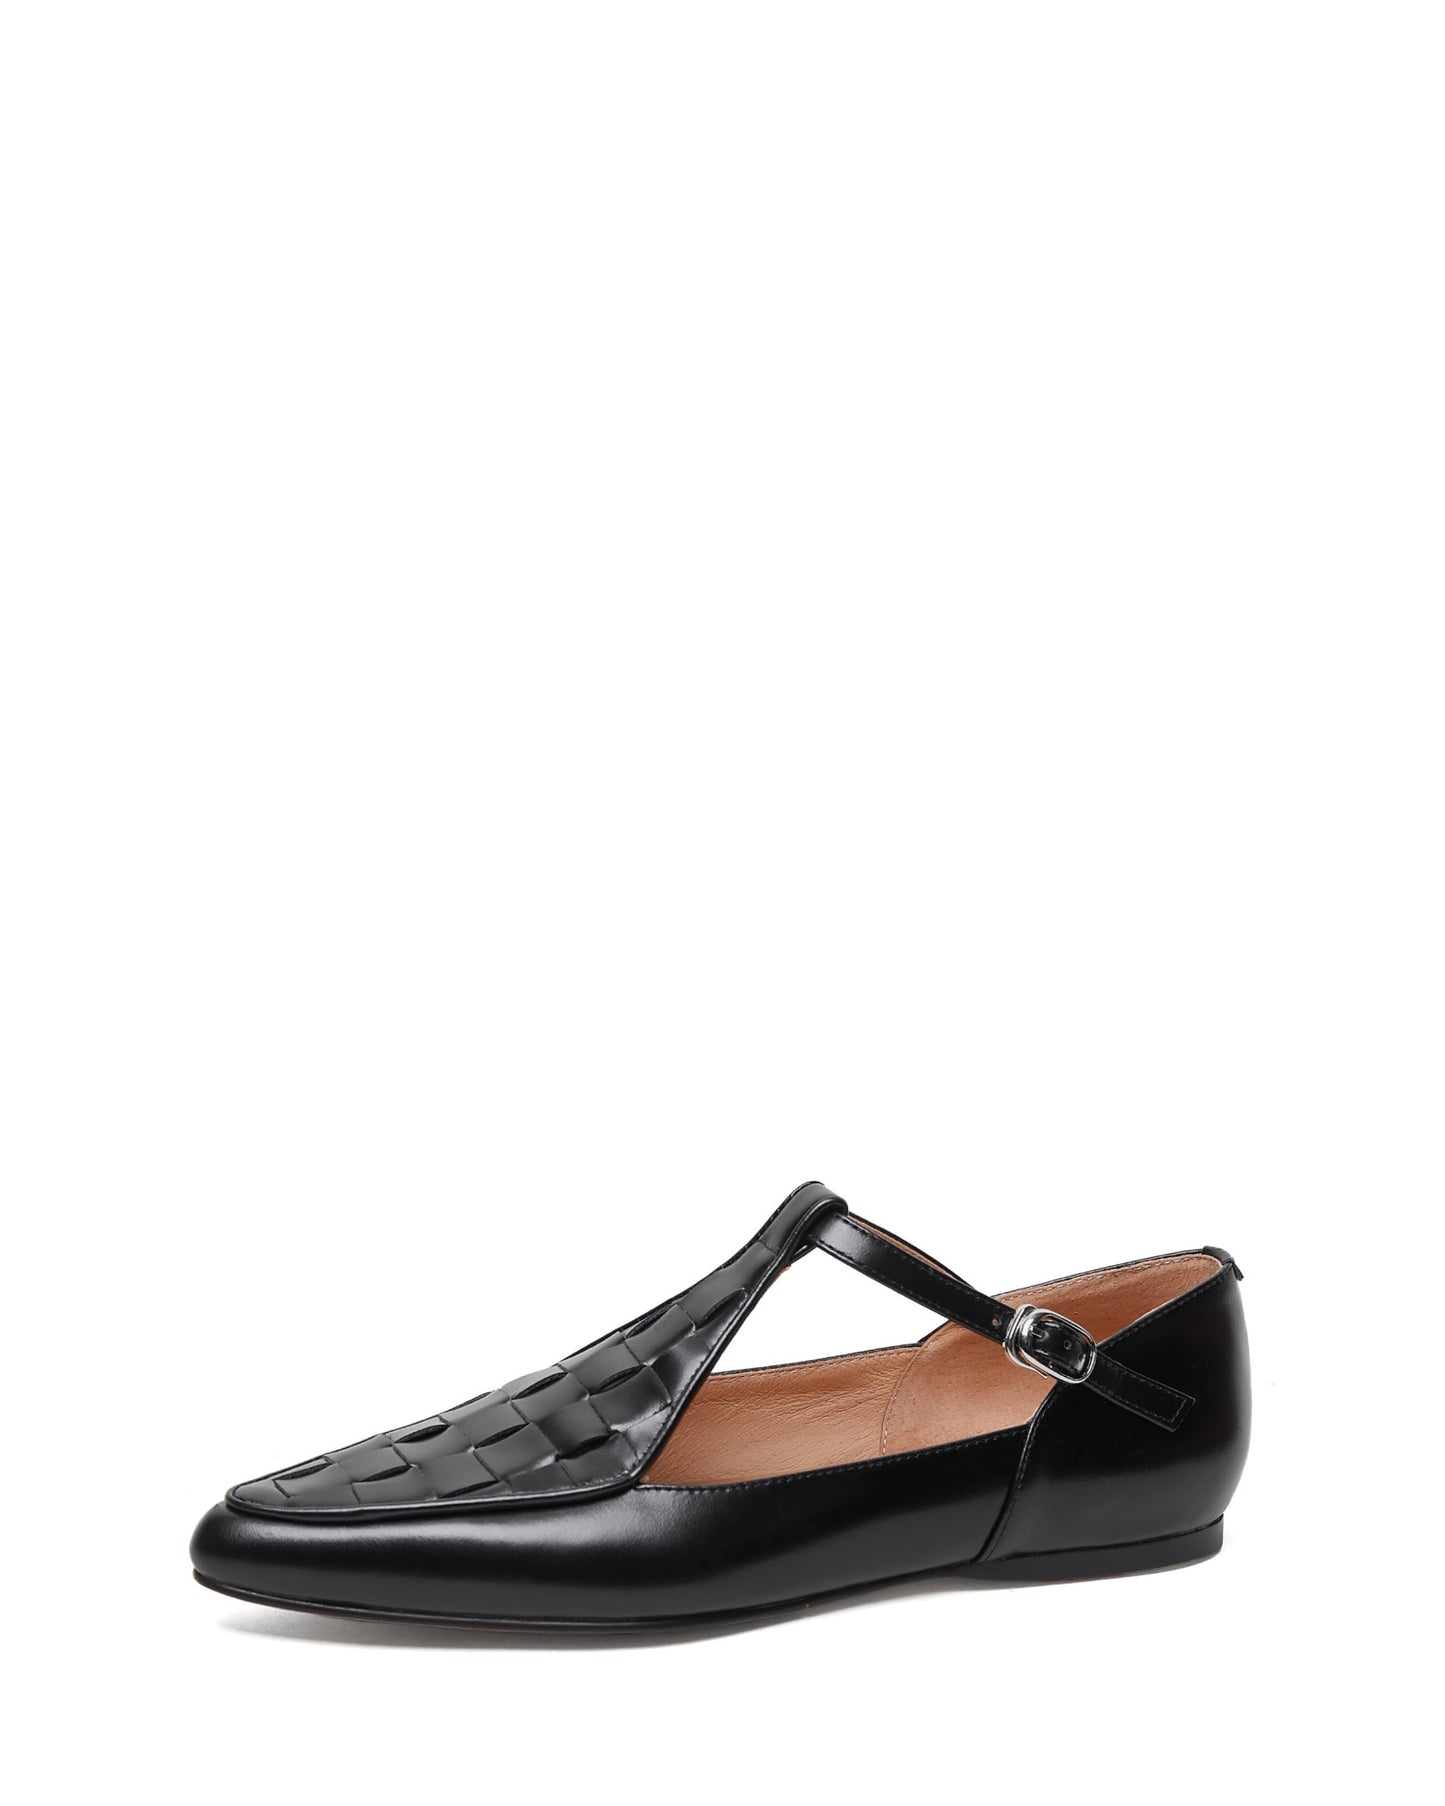 Mons-T-Strap-Woven-Leather-Loafers-Black